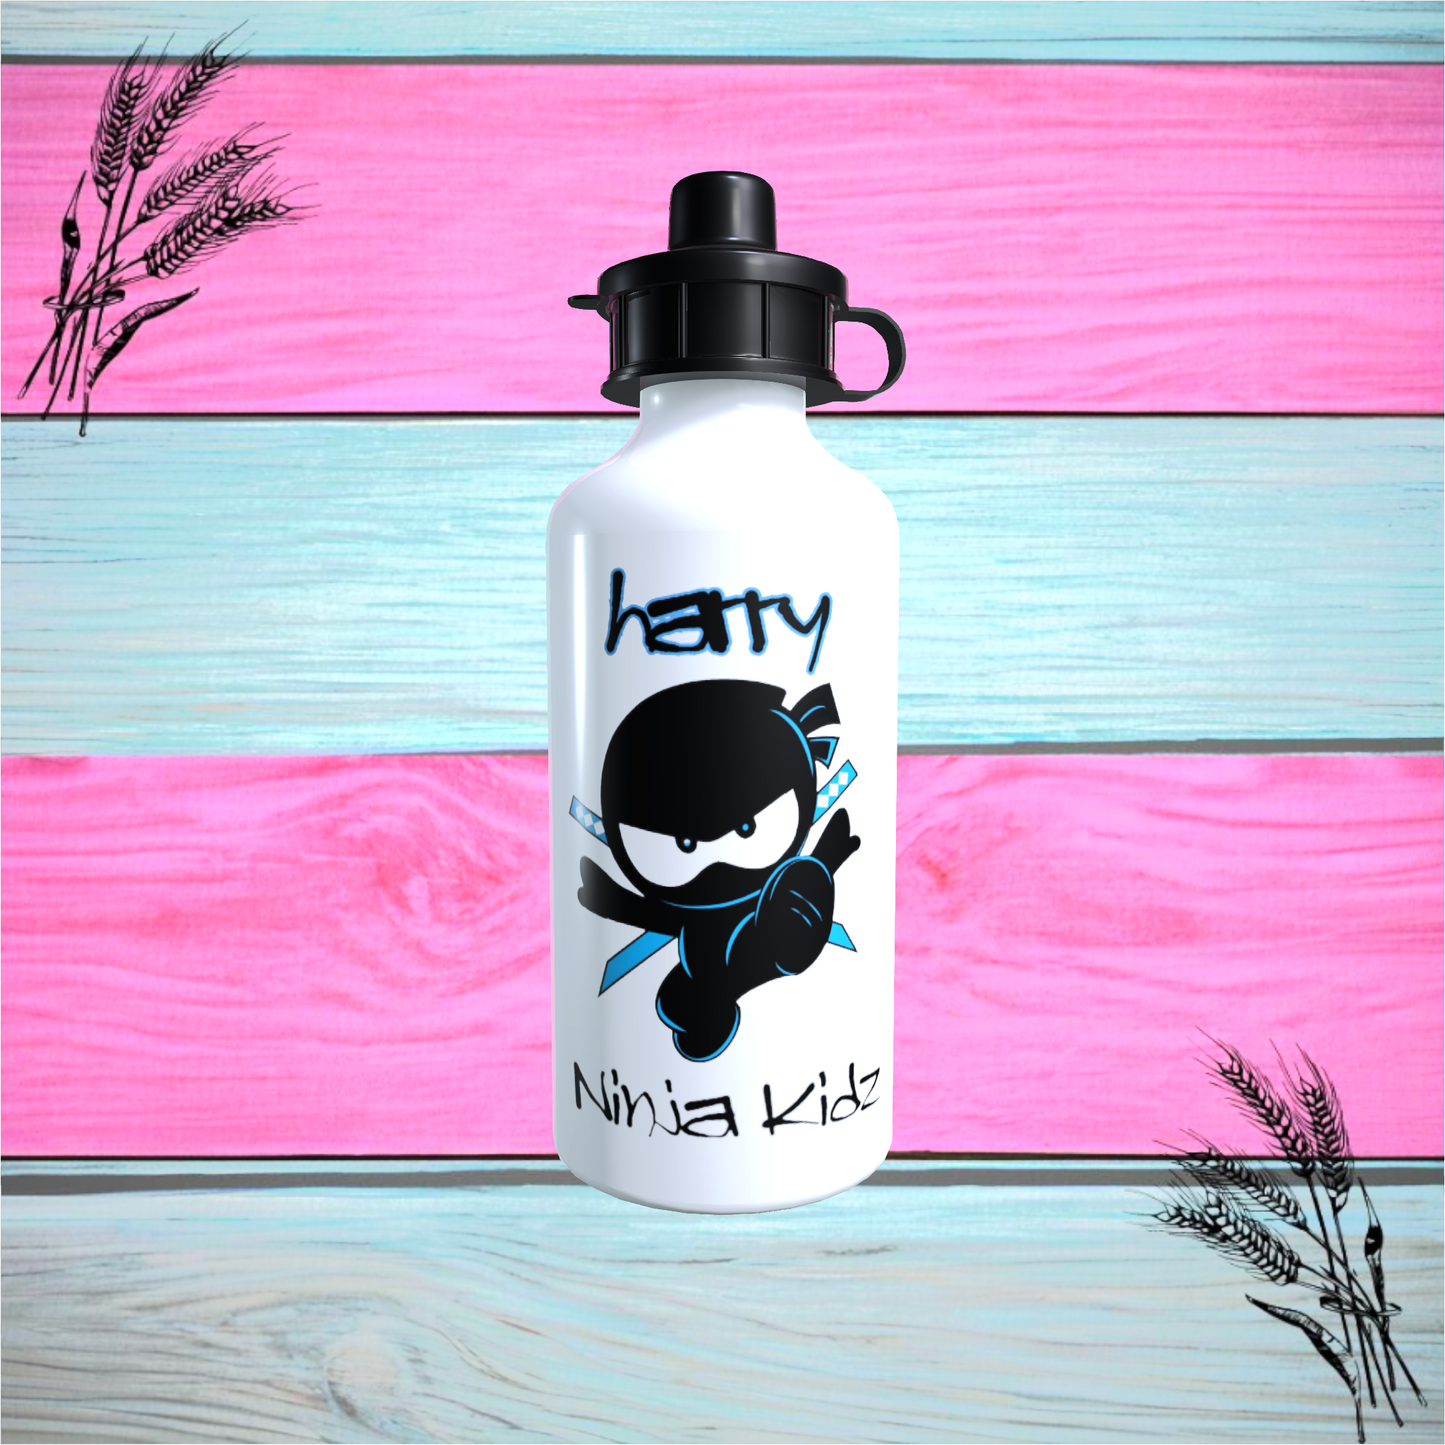 Personalised Ninja Kidz Aluminium Water Bottle With Any Name, Available In White Or Silver